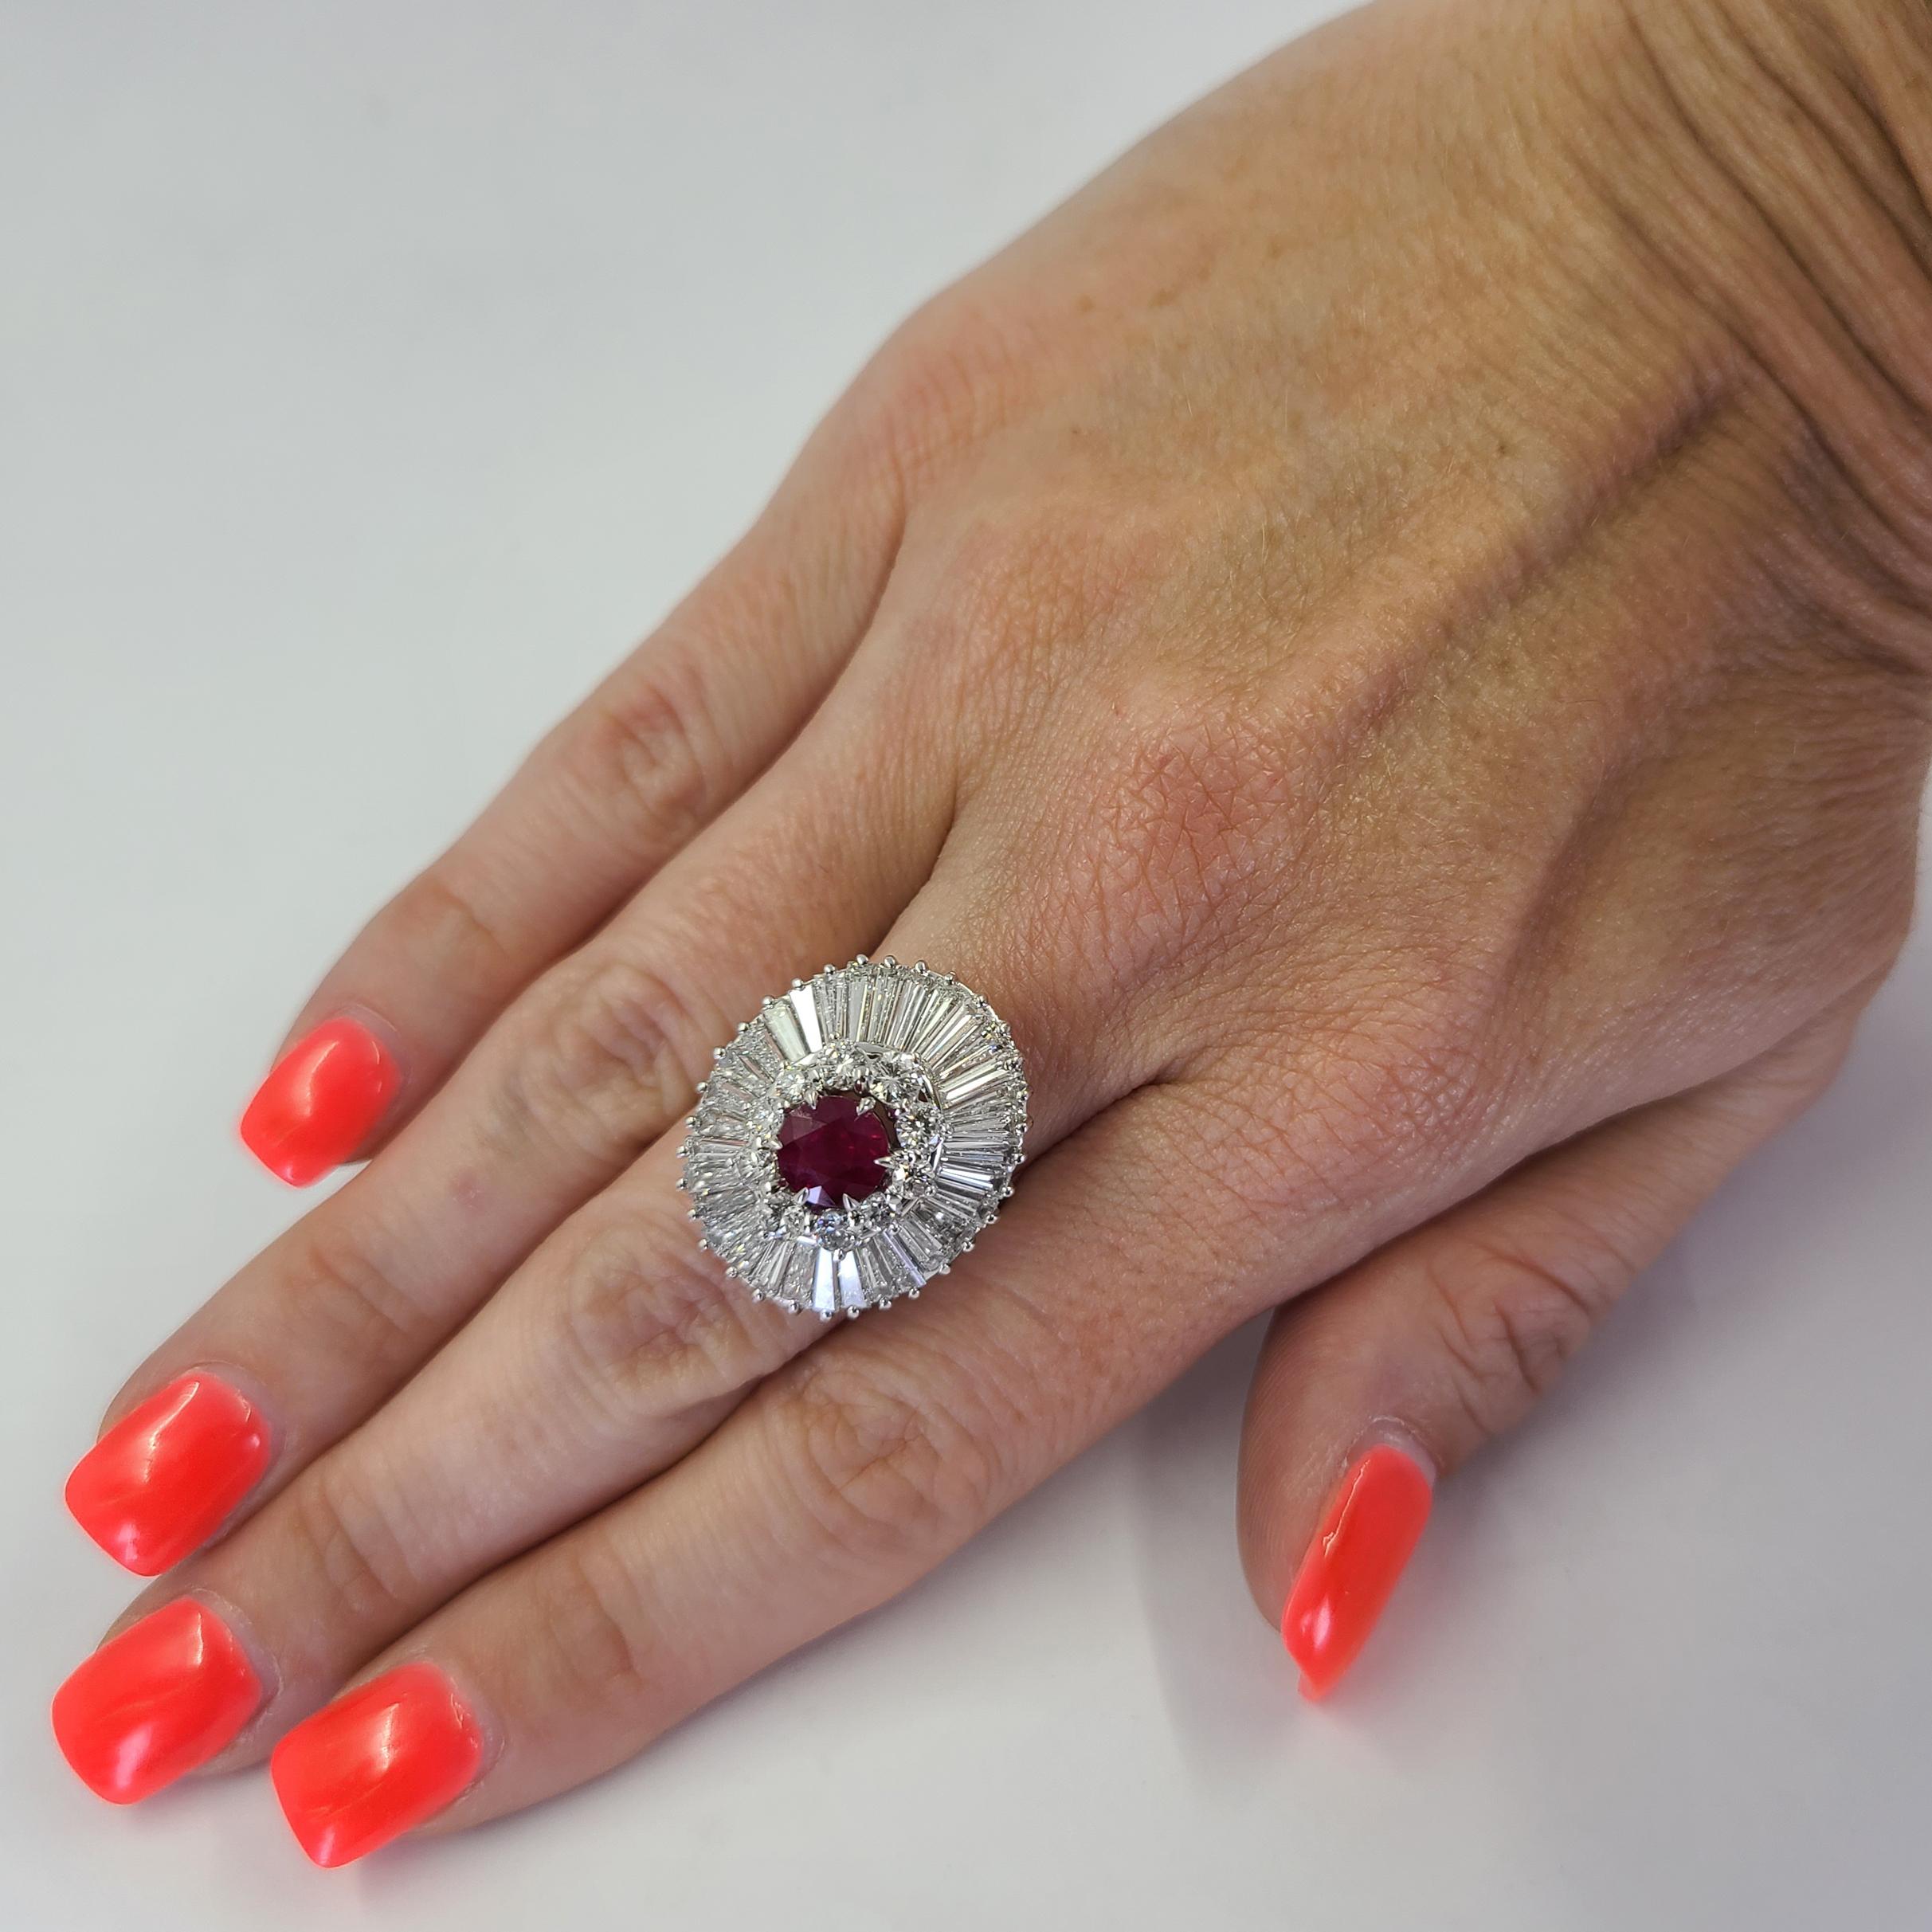 Platinum Ballerina Ring Featuring A 1.30 Carat Round Ruby Surrounded By 6.00 Carat Total Weight Tapered Baguette and Round Diamonds Of VS Clarity and G Color. Finger Size 5.75; Purchase Includes One Sizing Service Prior to Shipment. Finished Weight